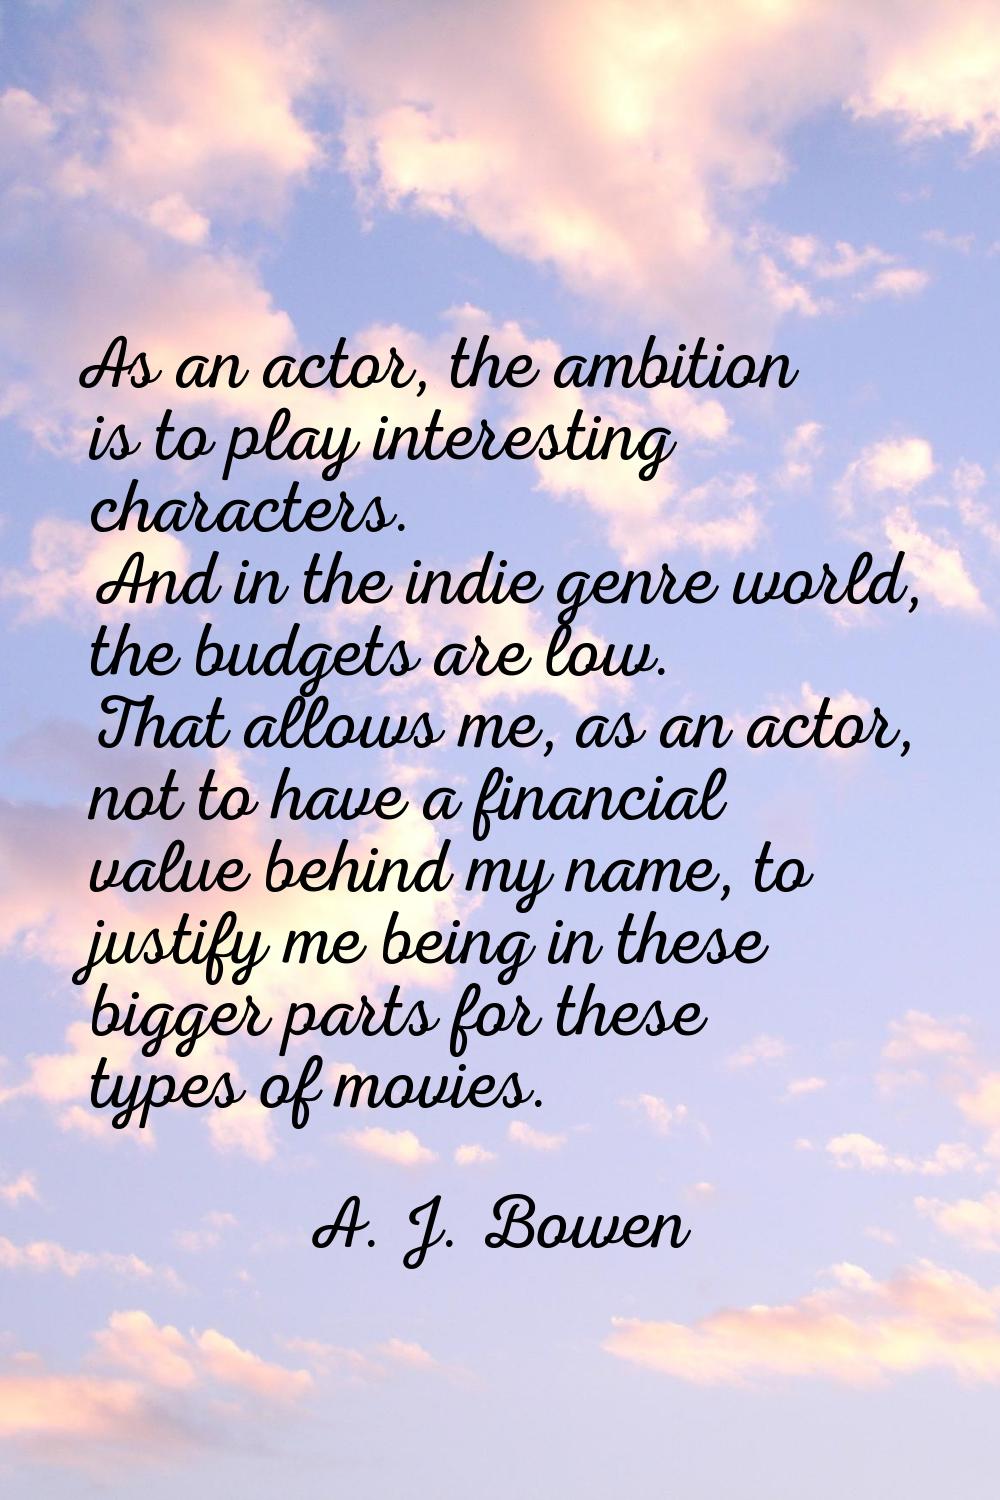 As an actor, the ambition is to play interesting characters. And in the indie genre world, the budg